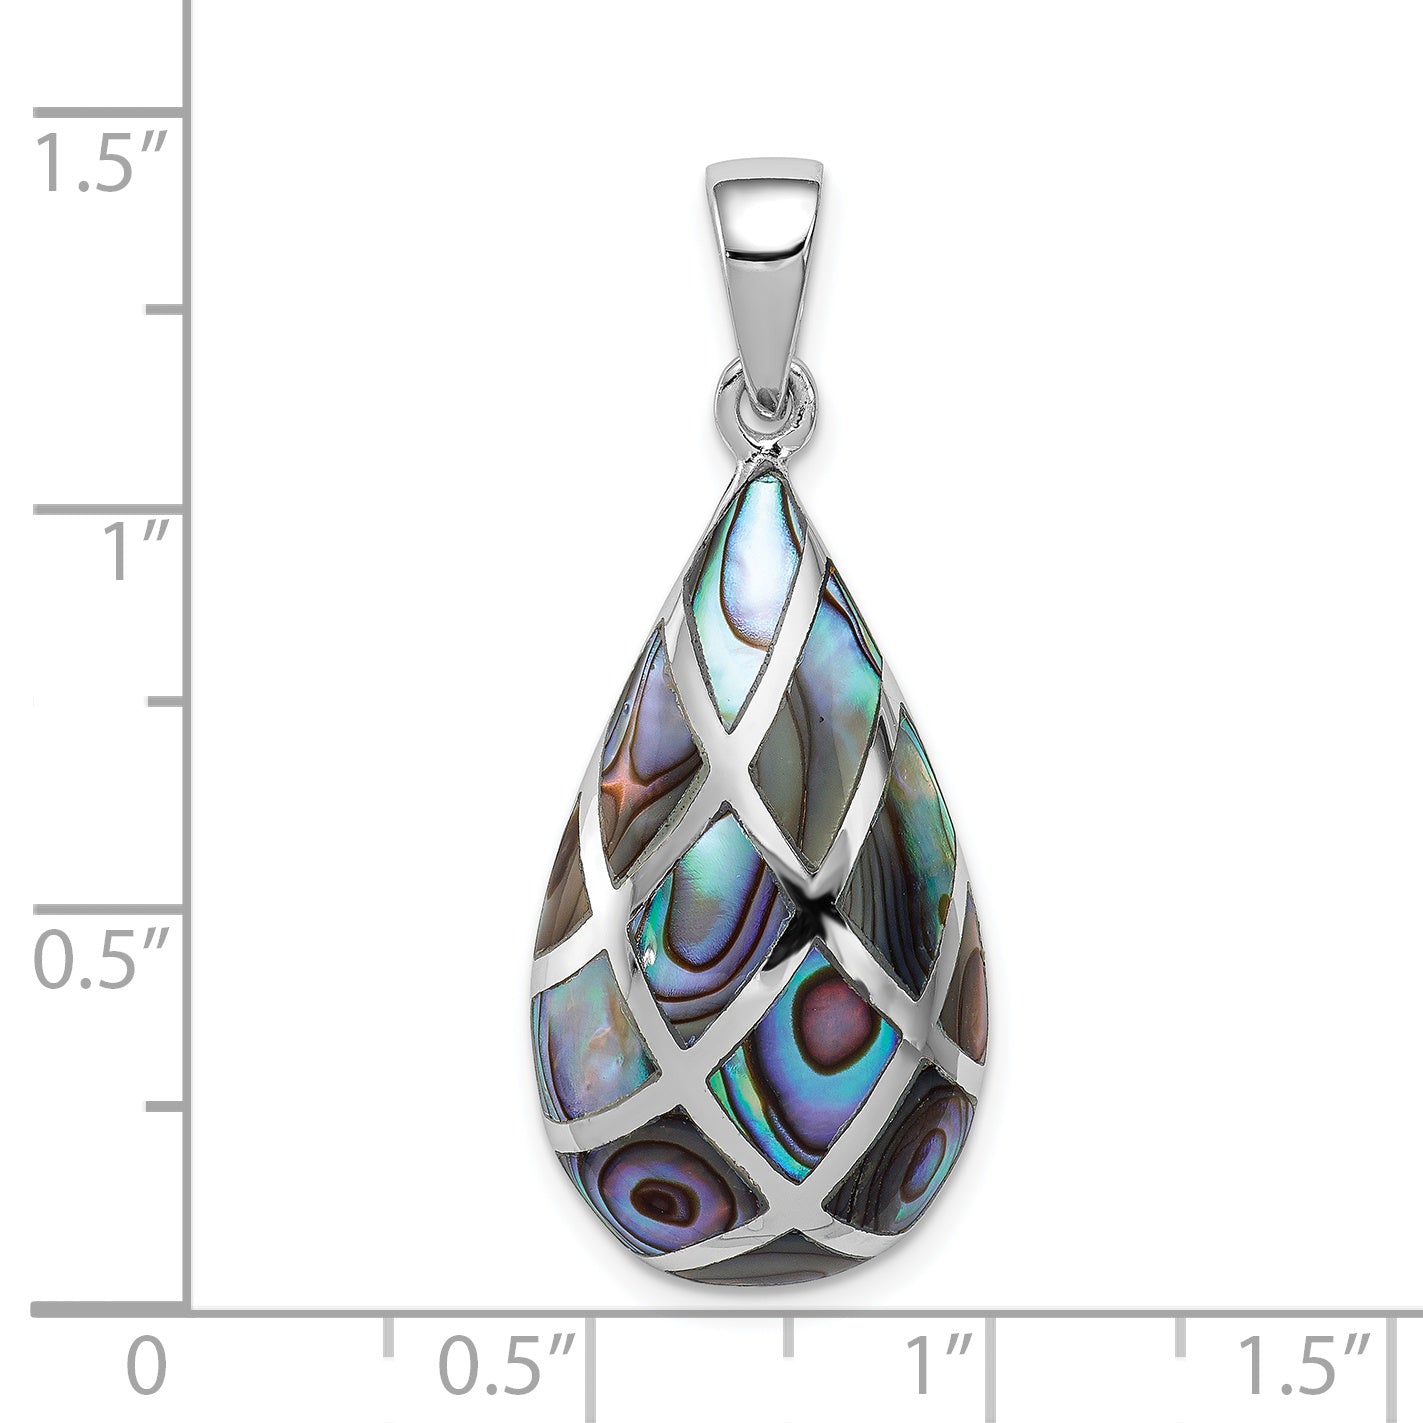 Sterling Silver Rhodium-plated Polished Teardrop Abalone Pendant